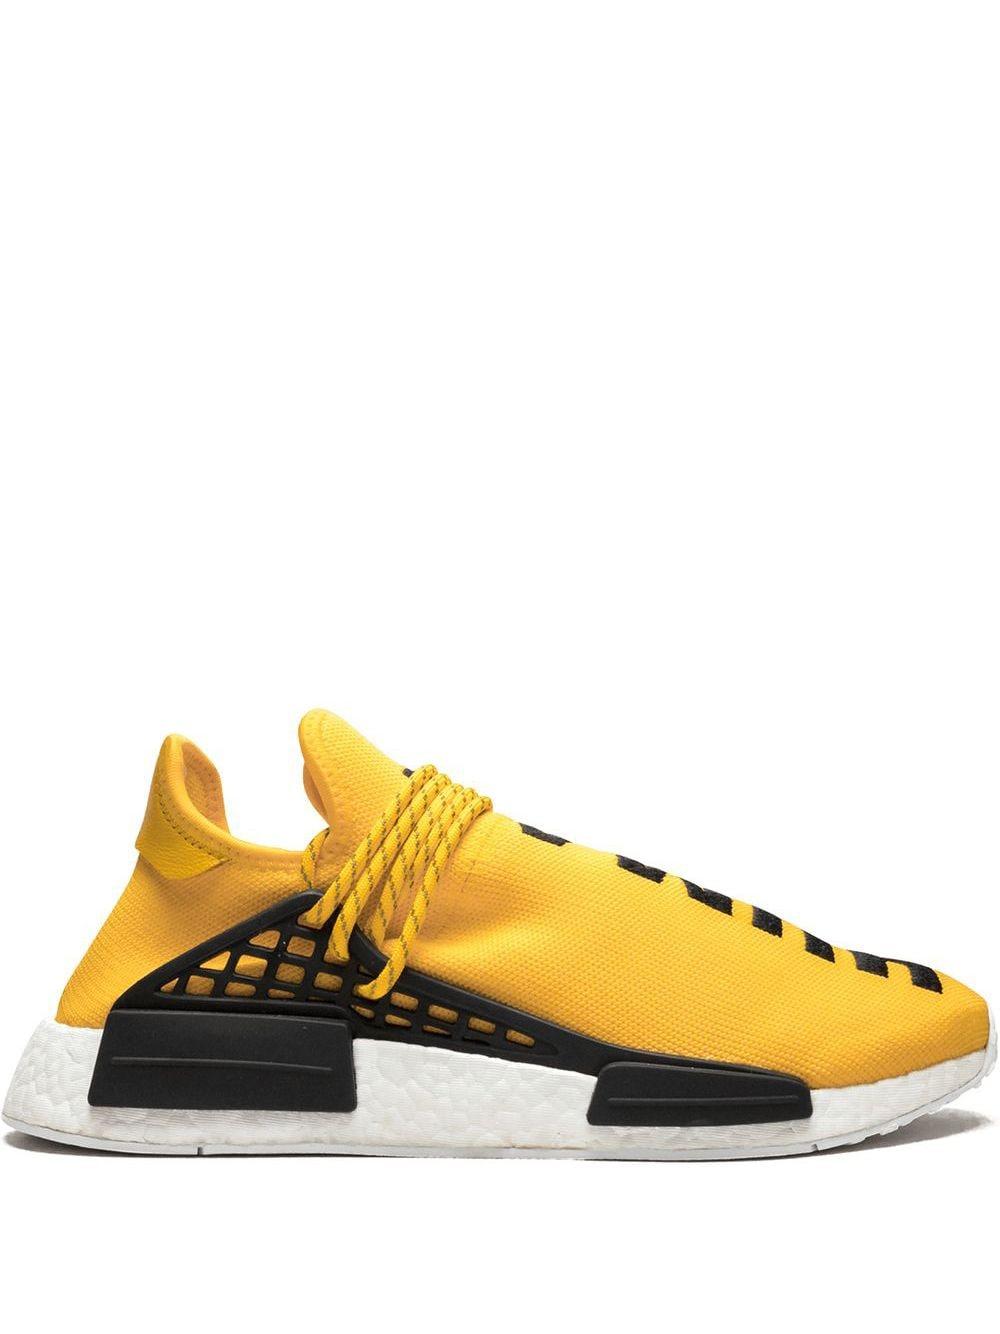 adidas Pw Human Race Nmd 'pharrell' Shoes in Yellow/Black-White (Yellow)  for Men - Save 56% - Lyst